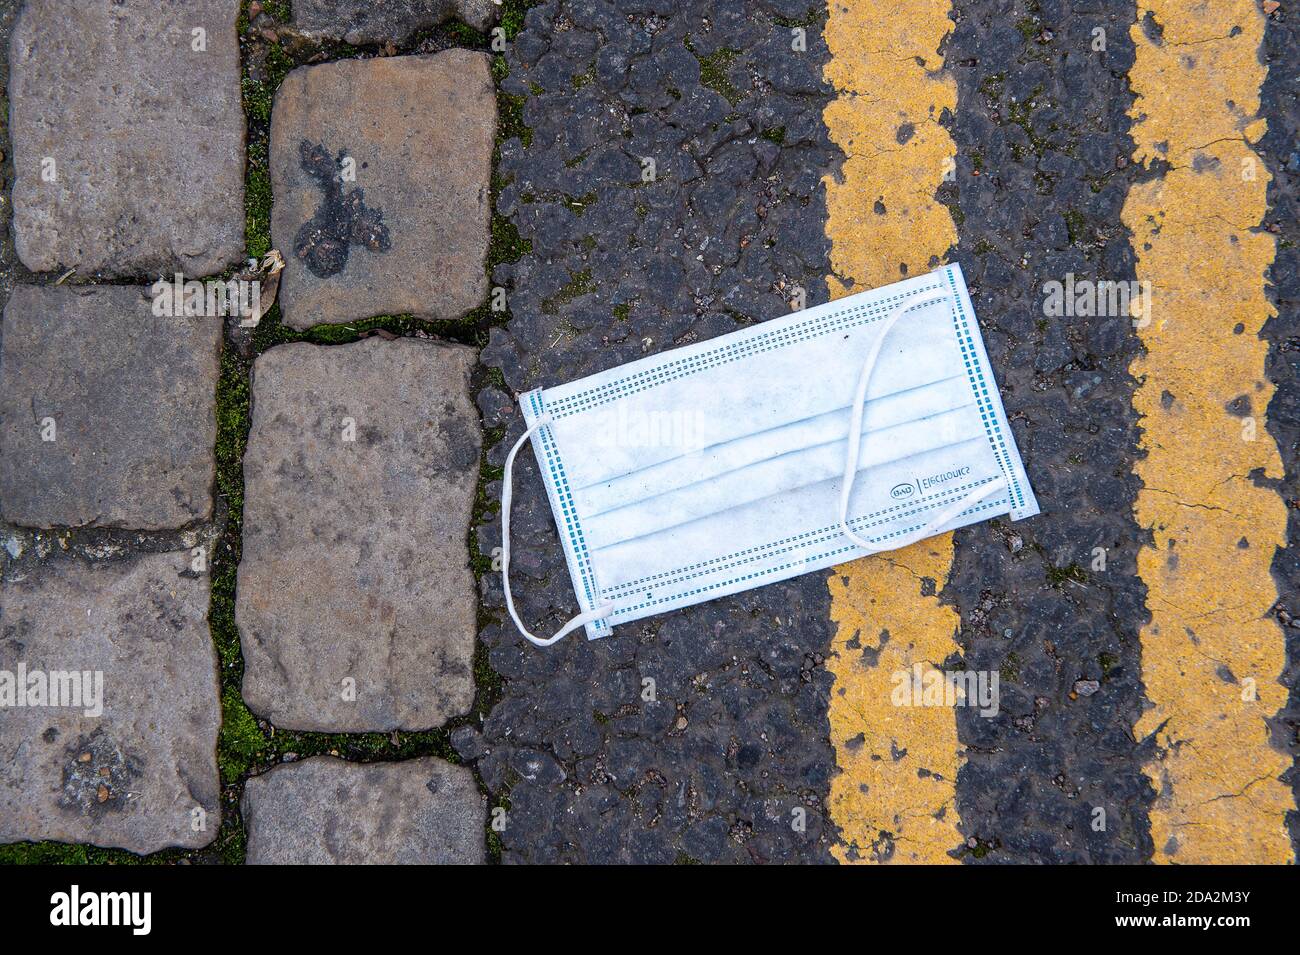 Windsor, Berkshire, UK. 7th November, 2020. The familiar sight of a discarded face mask. Windsor was much busier today on the third day of the new Covid-19 Coronavirus lockdown. A lot more shops and cafes were open than during the first lockdown. Credit: Maureen McLean/Alamy Stock Photo